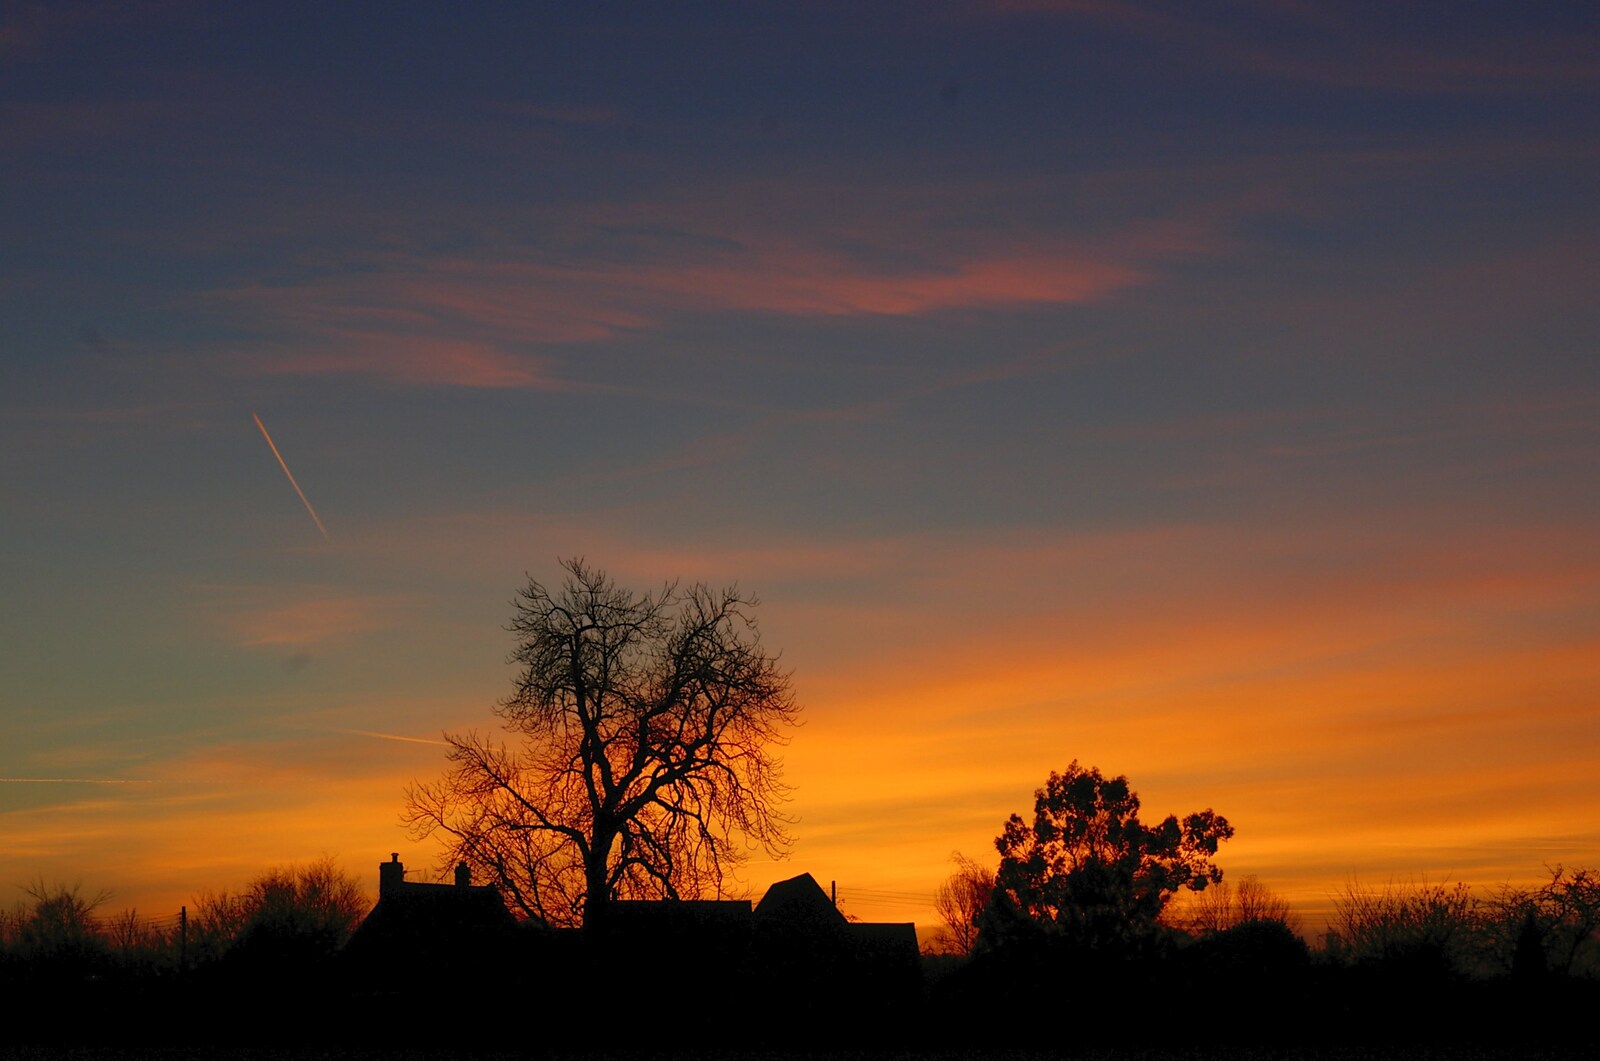 An aircraft contrail looks like a meteor from Christmas Lights and St. Mary's Church, Diss, Norfolk - 29th November 2004